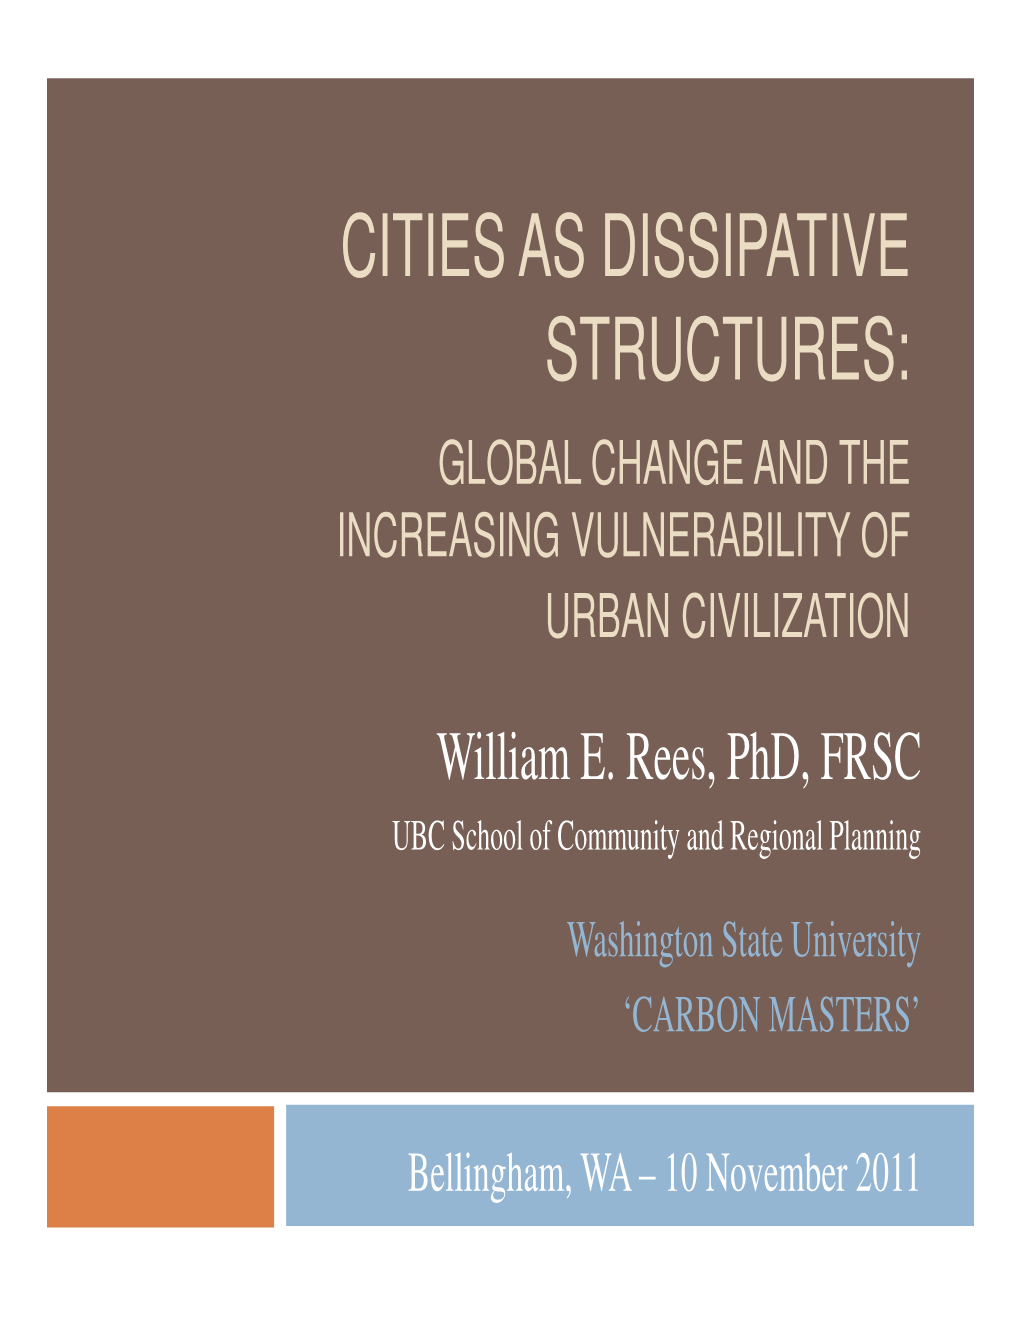 Cities As Dissipative Structures: Global Change and the Increasing Vulnerability of Urban Civilization